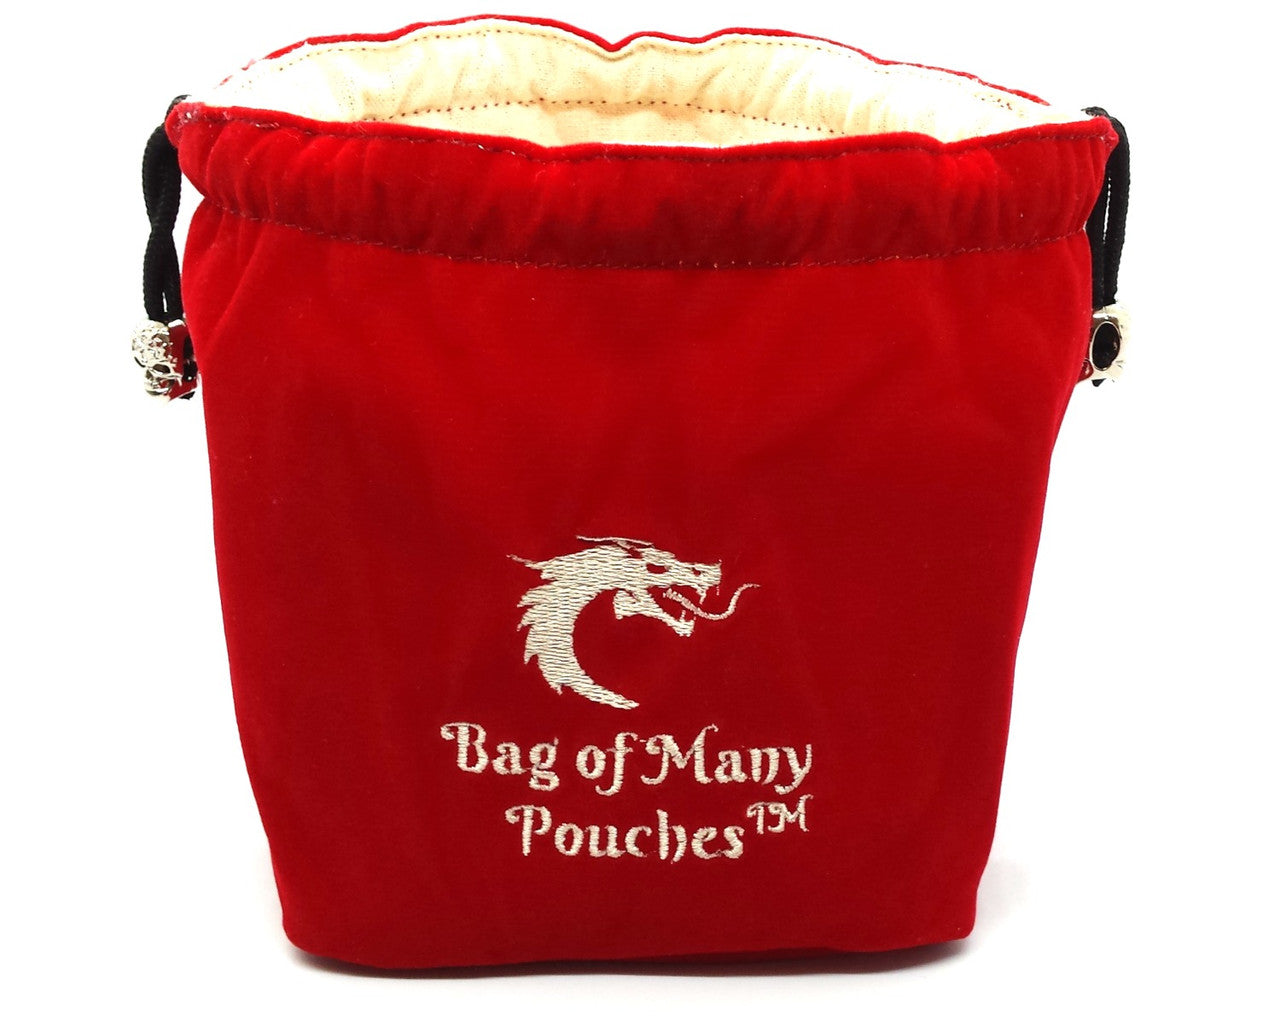 Bag of Many Pouches RPG DnD Dice Bag: Red